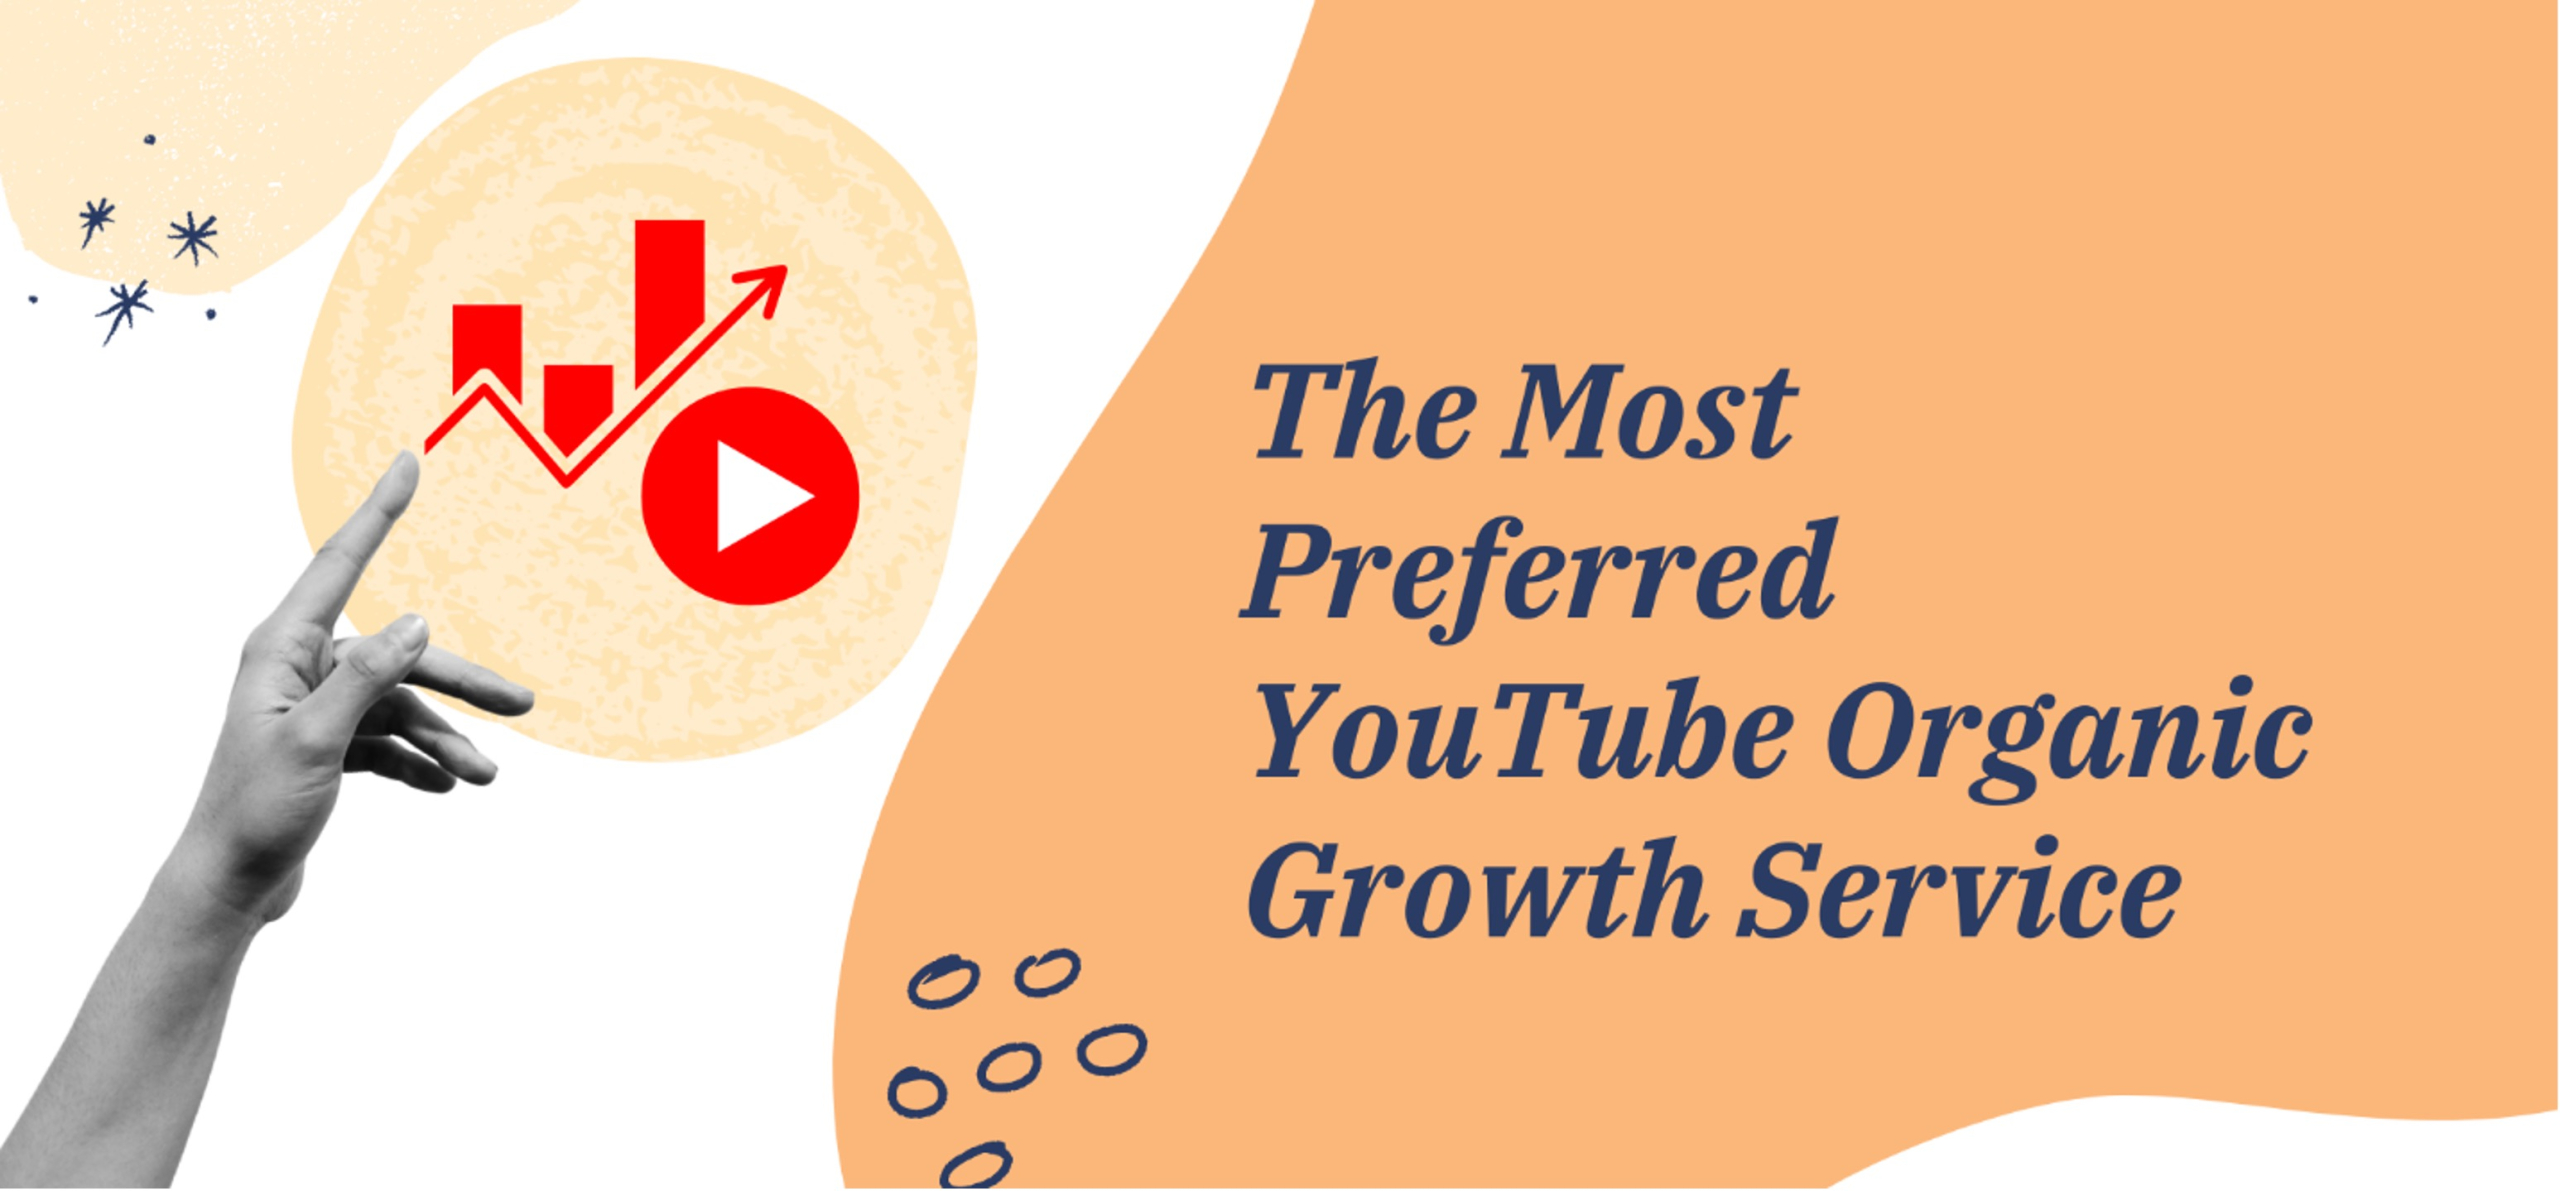 The Most Preferred YouTube Organic Growth Service